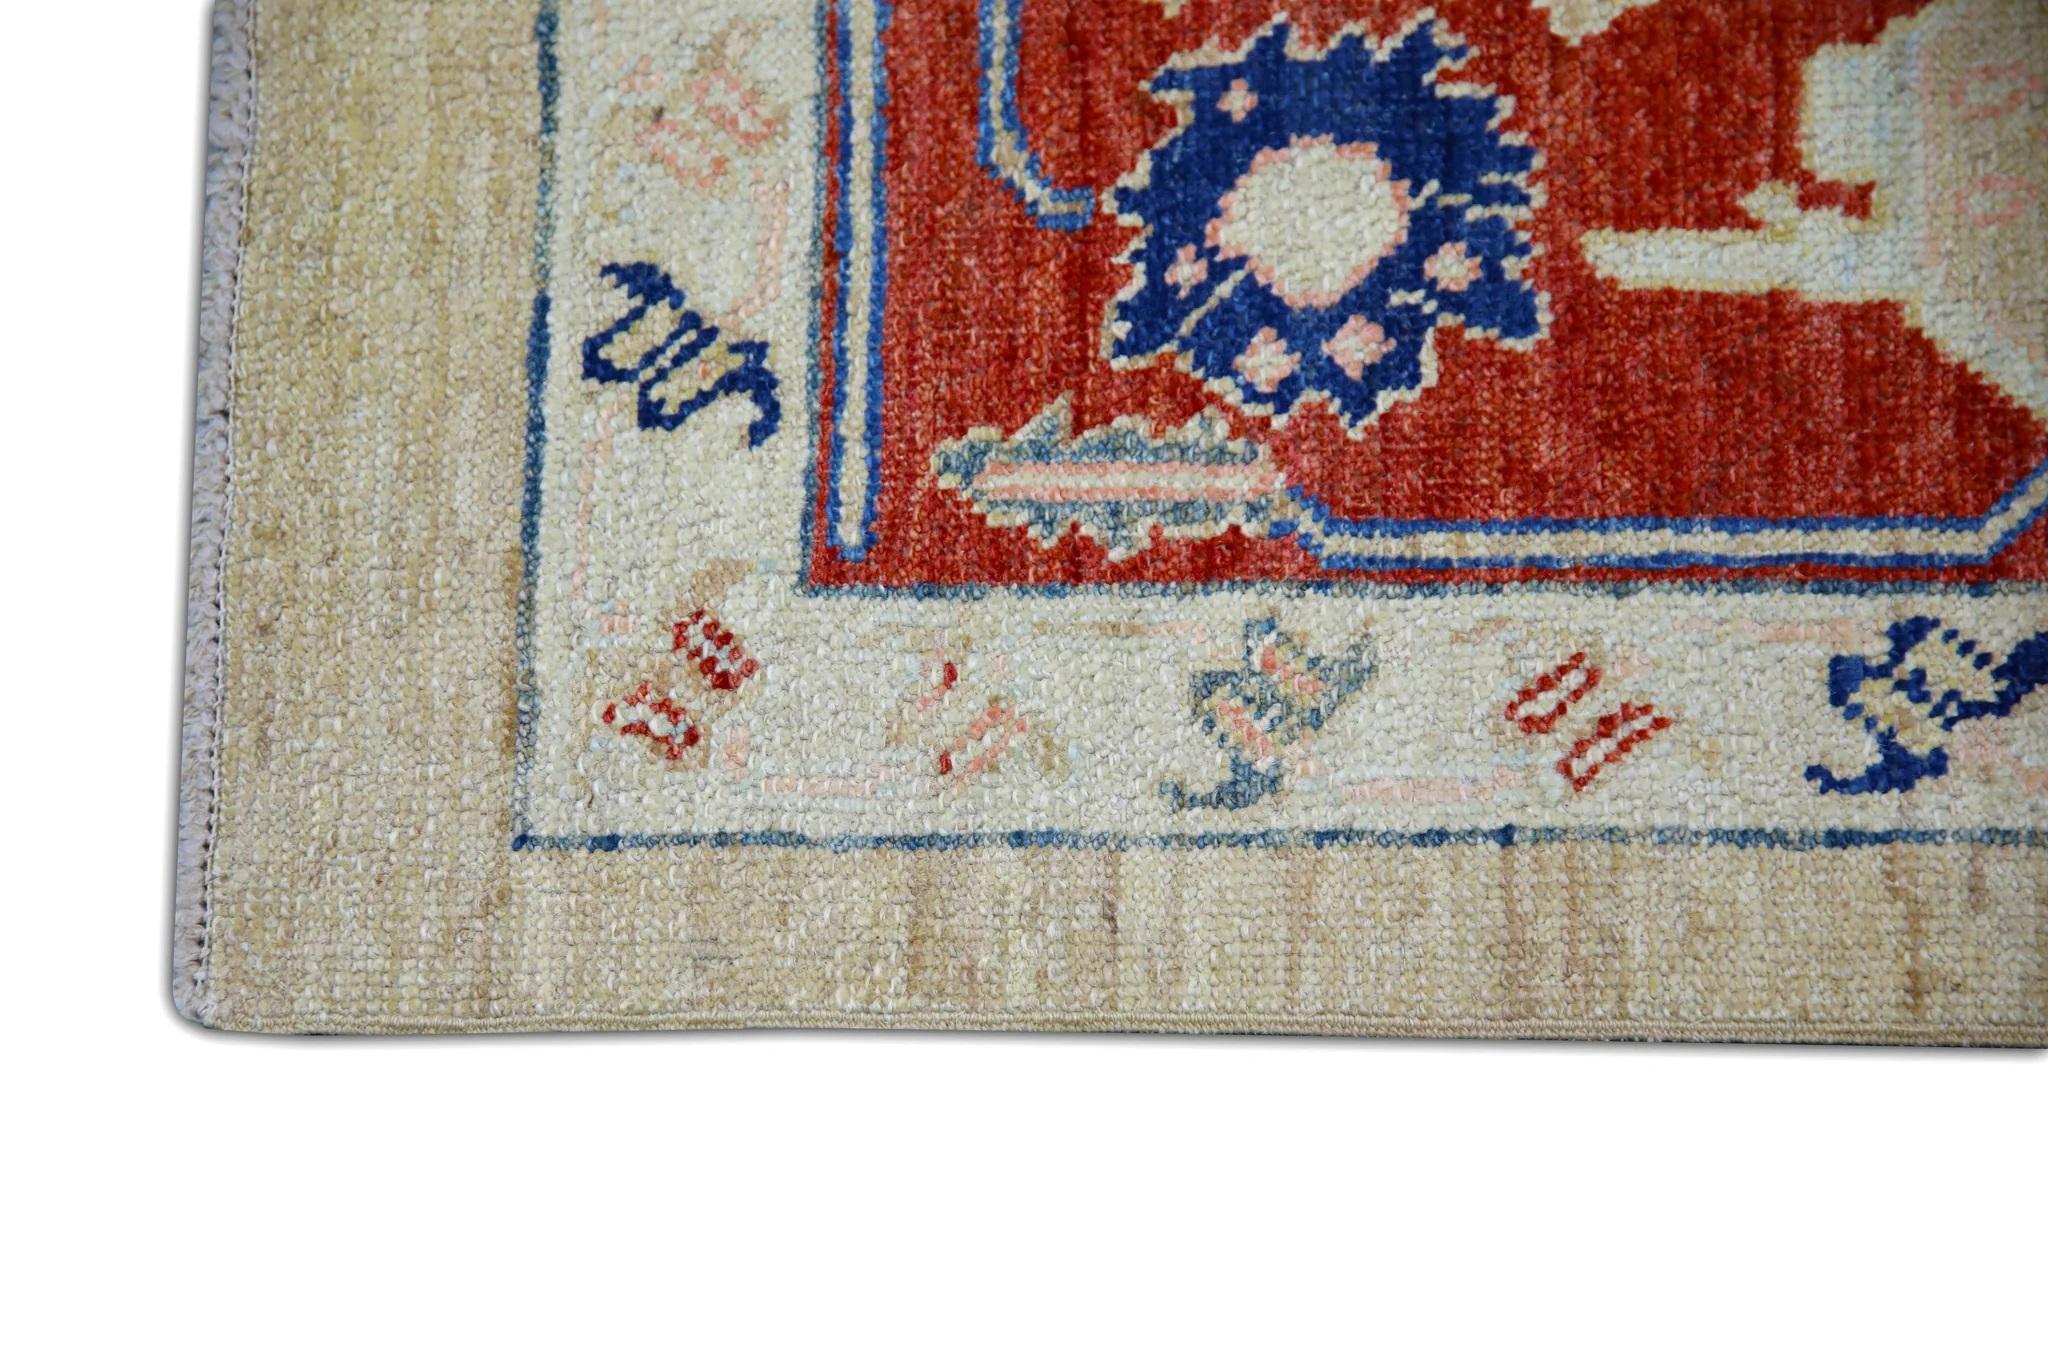 Vegetable Dyed Floral Turkish Finewoven Wool Oushak Rug in Bright Red and Blue 7'10